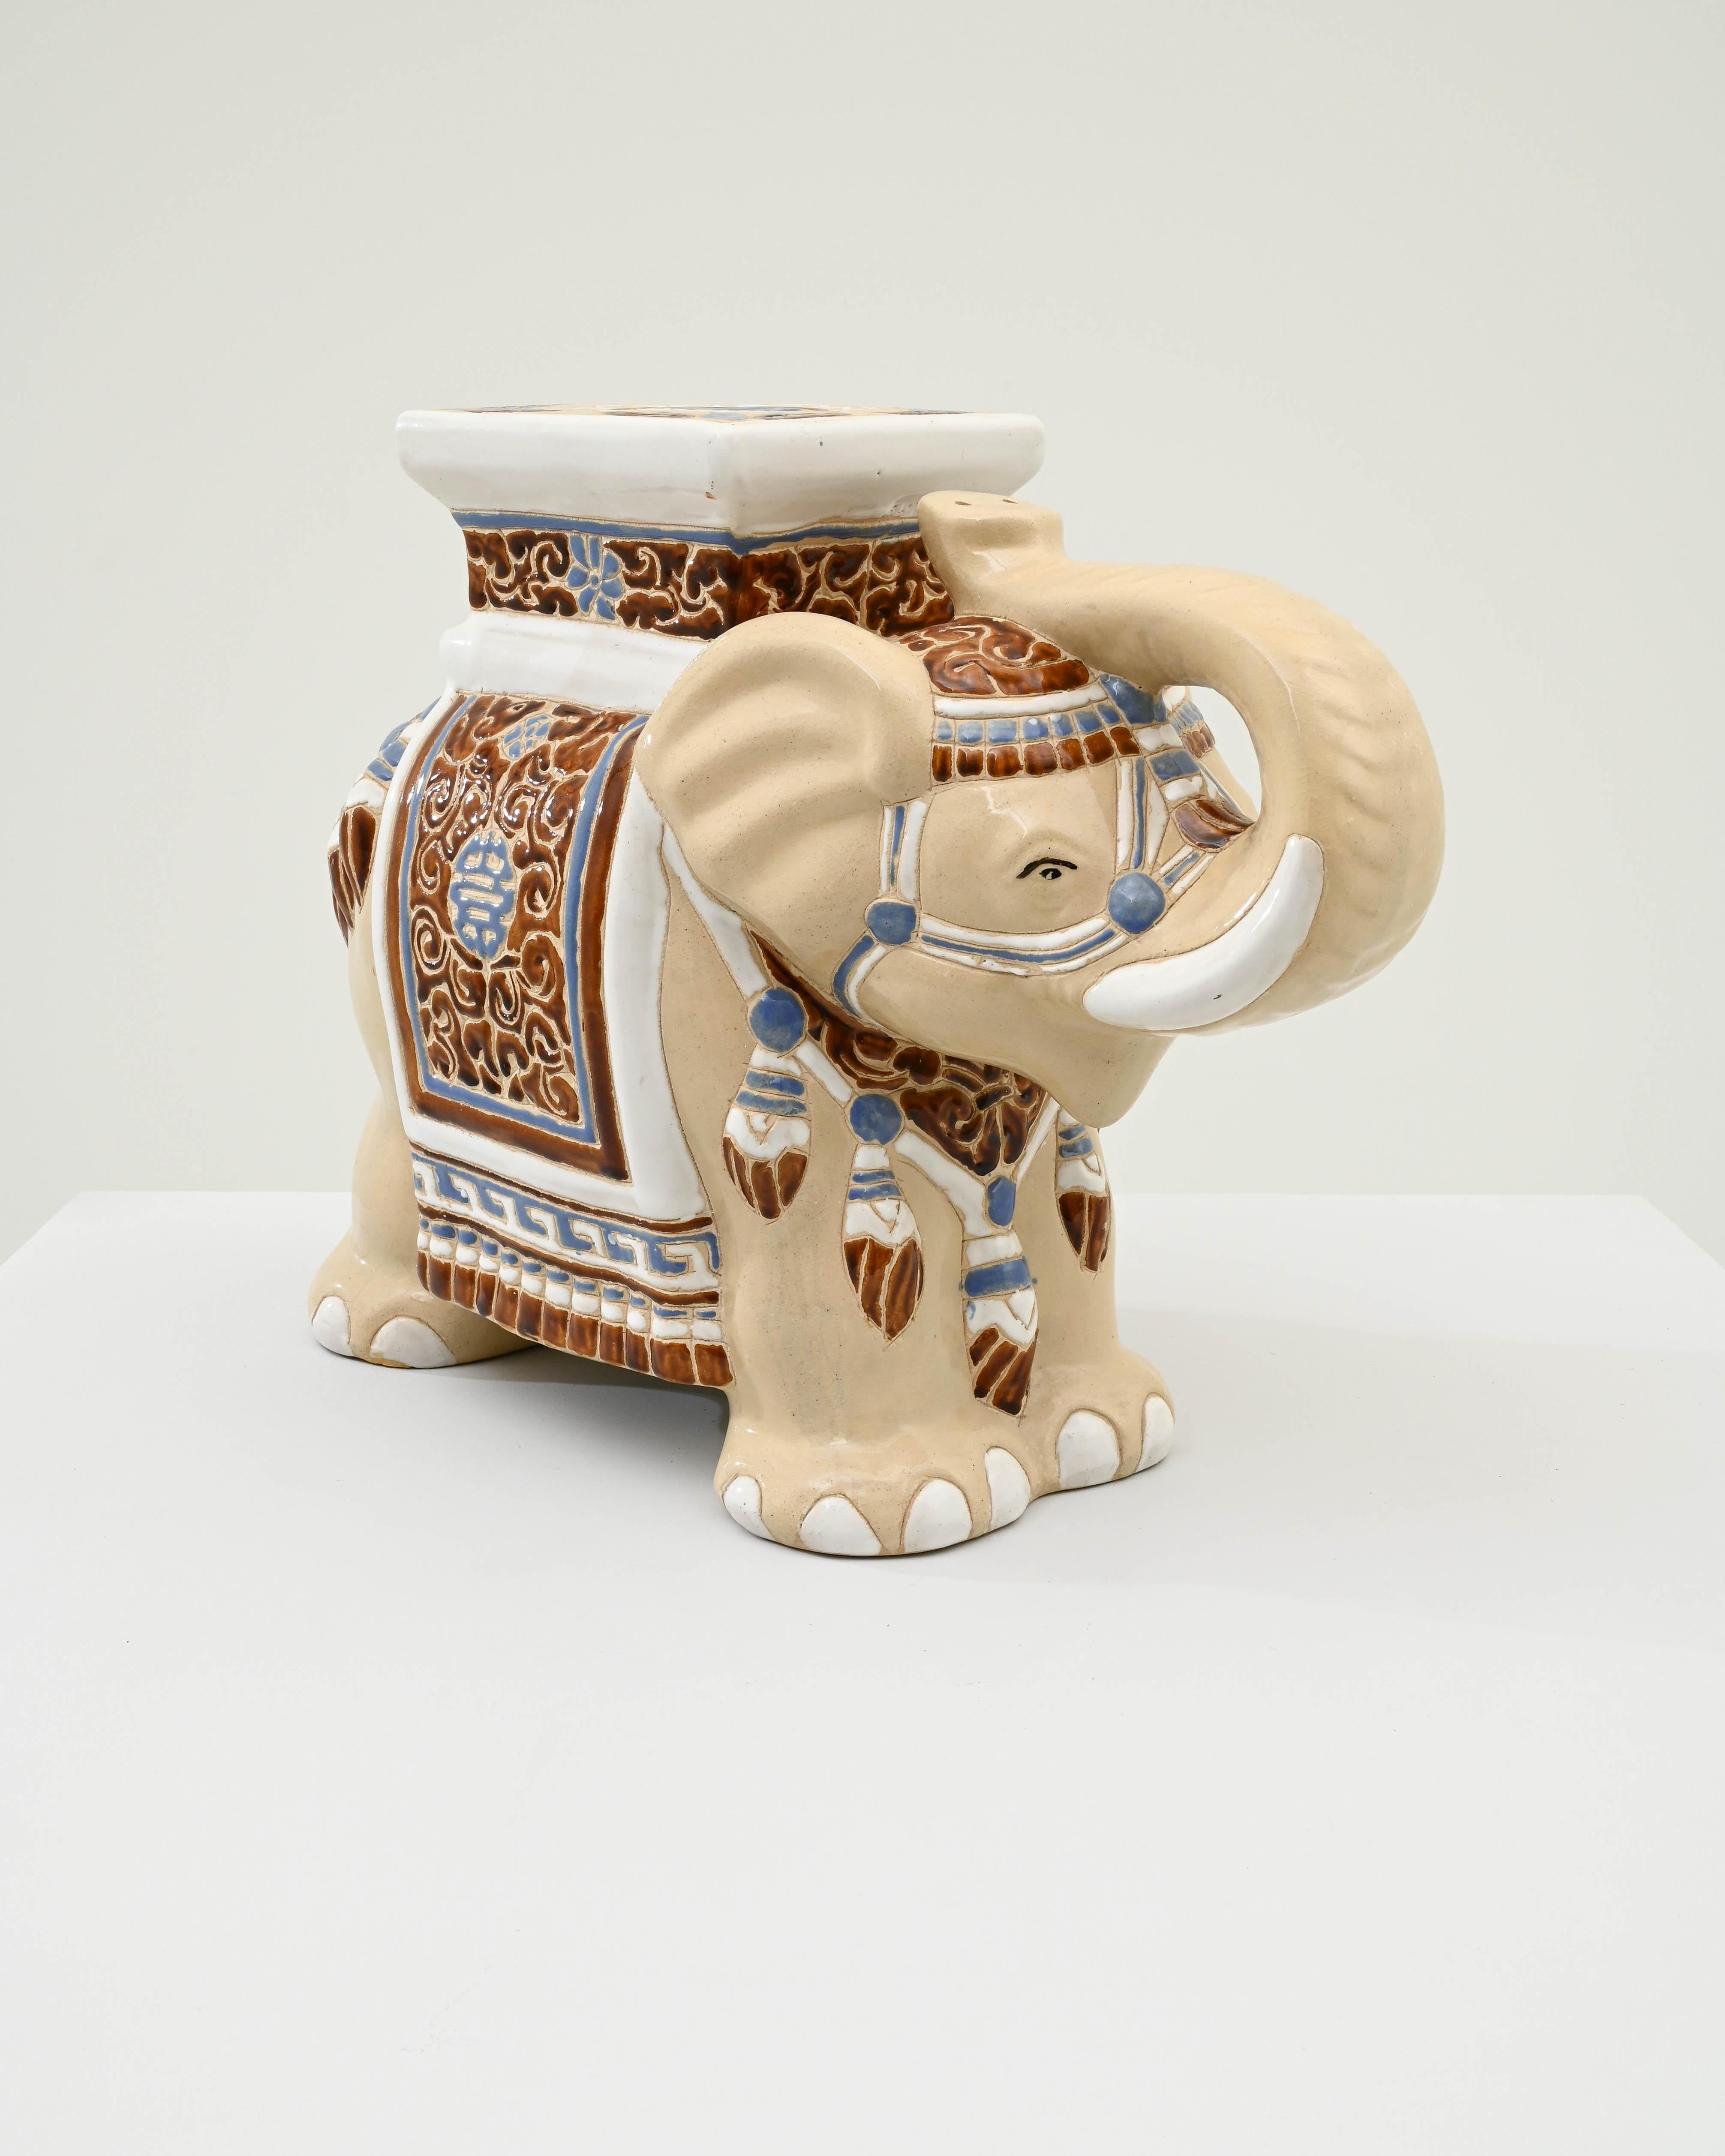 A ceramic decoration from 1960s France in the shape of an elephant. A saddle seat and blanket are glazed with pale blue and ochre, the elephant’s skin painted creamy off-white and laced with lines of the earth tone clay body; the assortment of